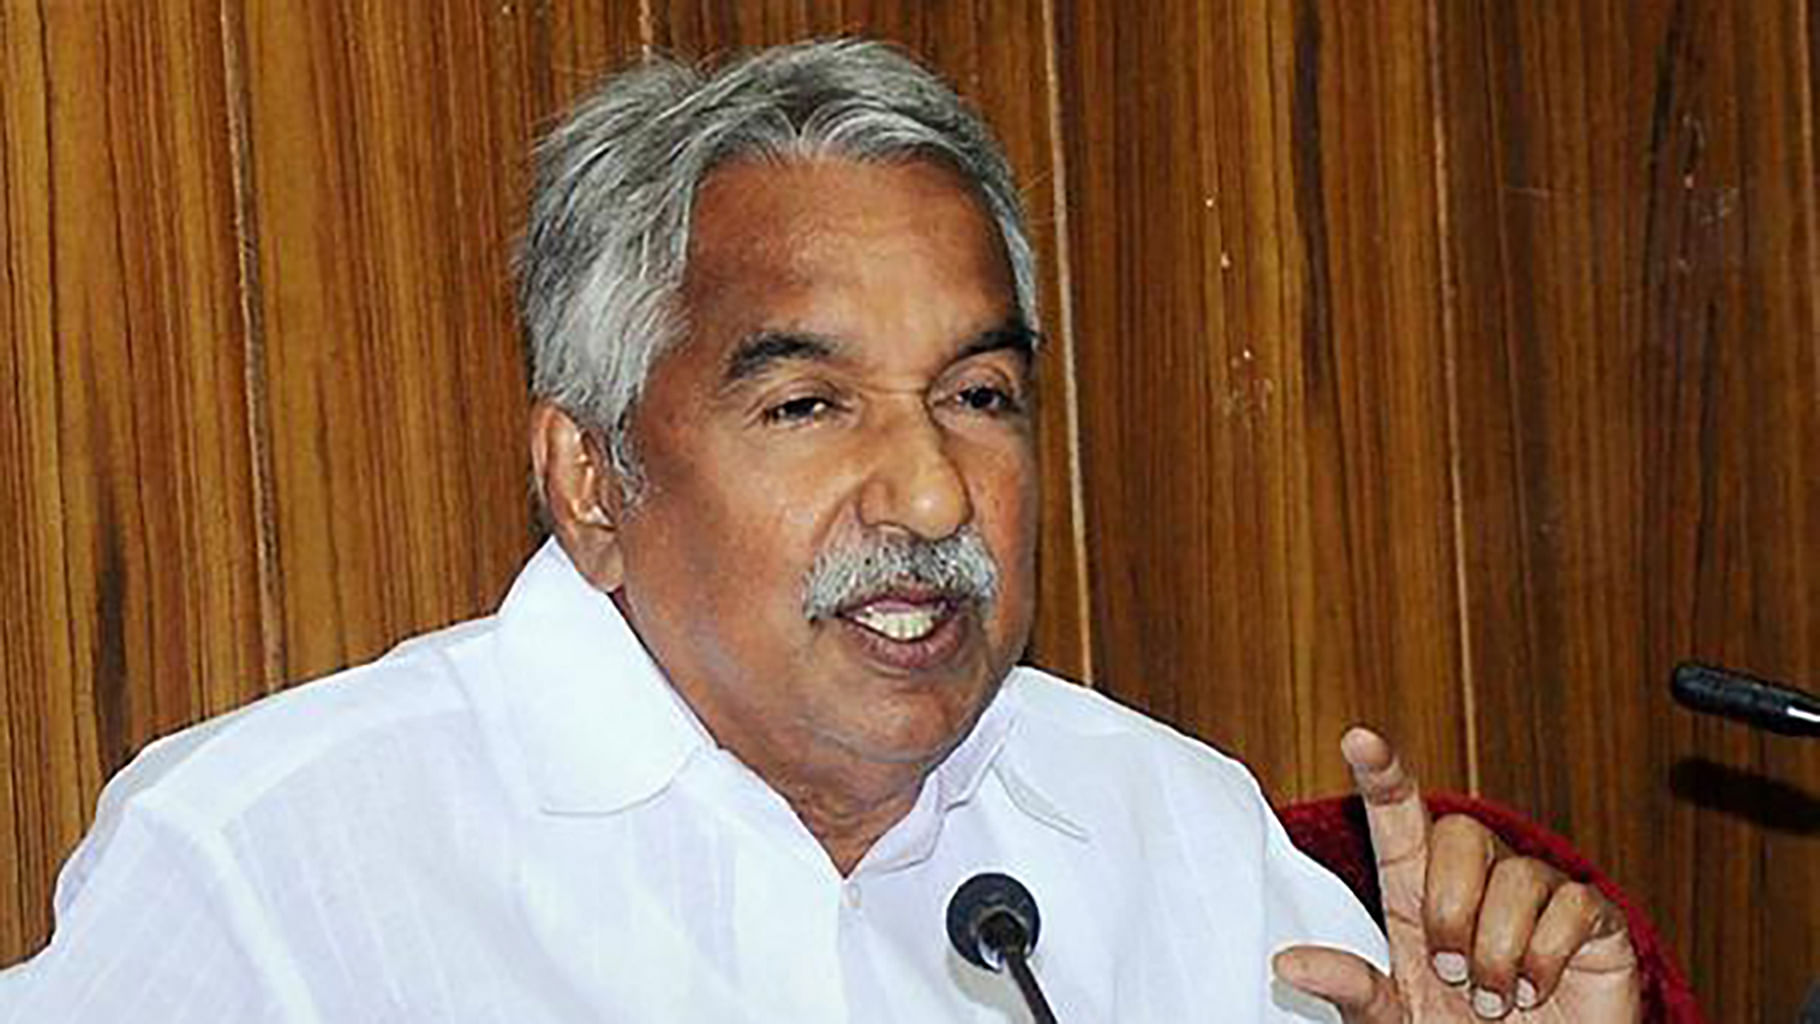 Kerala Chief Minister Oommen Chandy. (Photo: PTI)